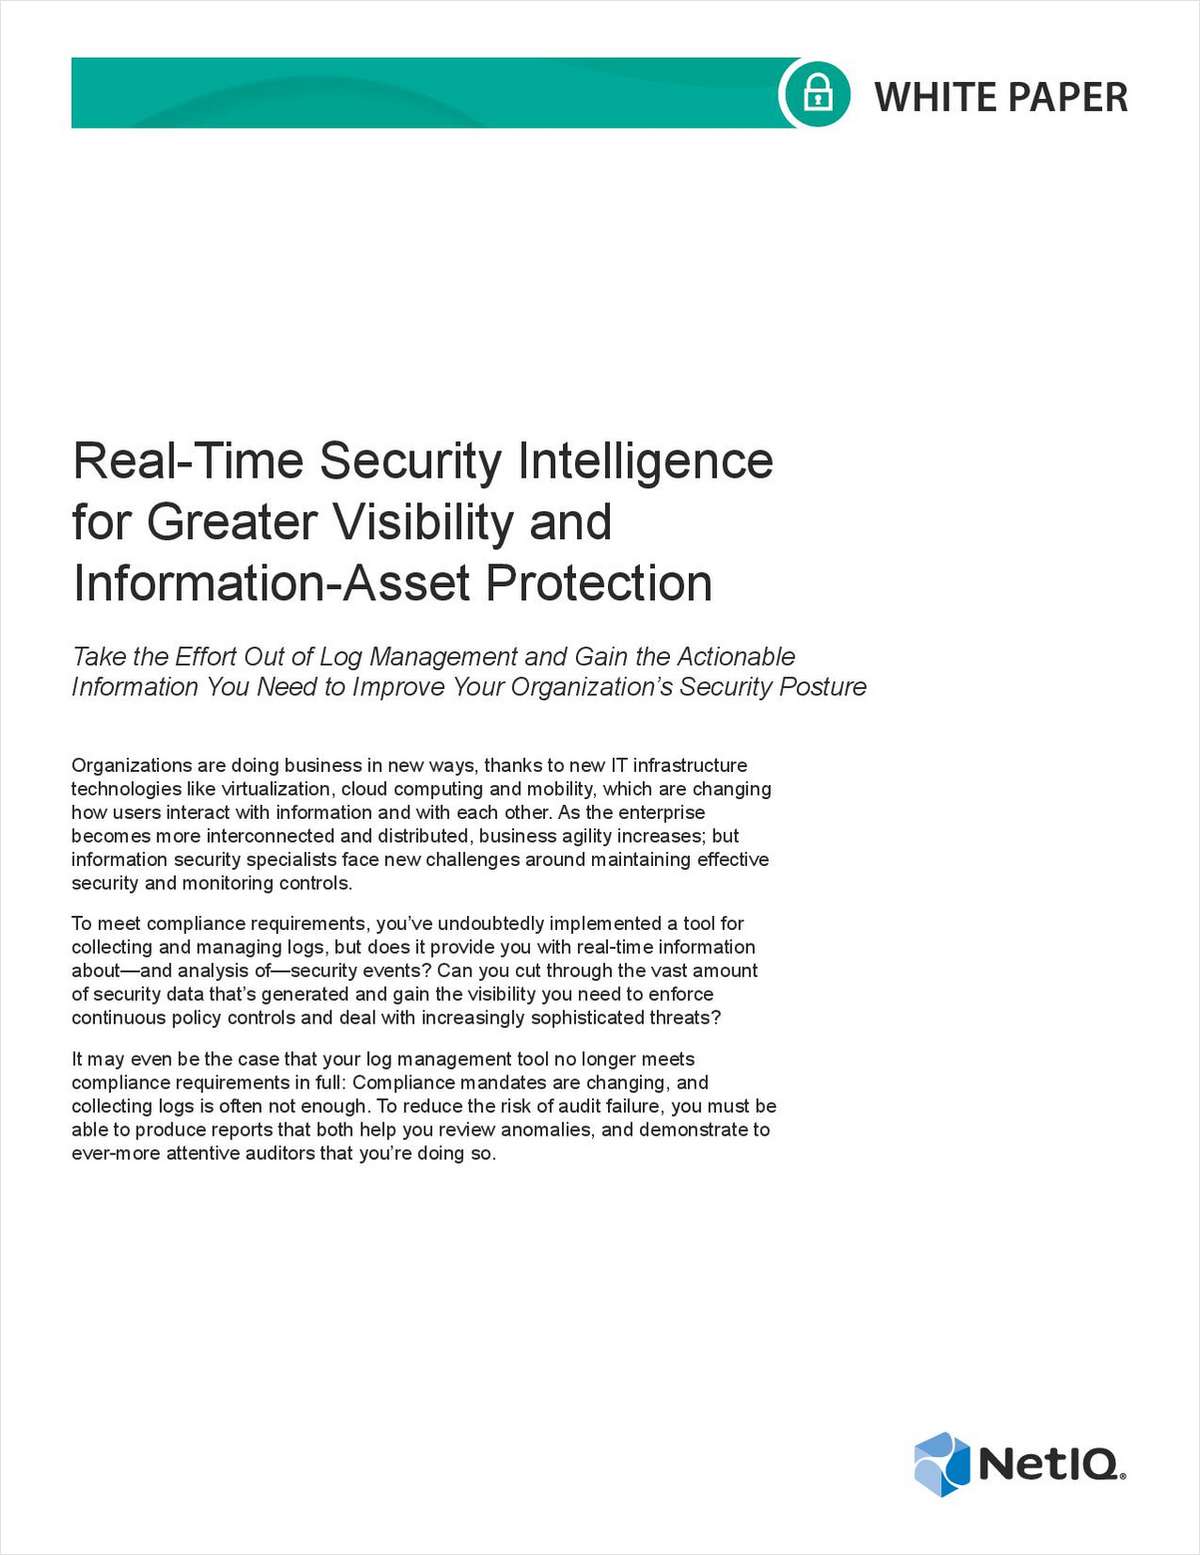 Real-Time Security Intelligence for Greater Visibility and Information-Asset Protection